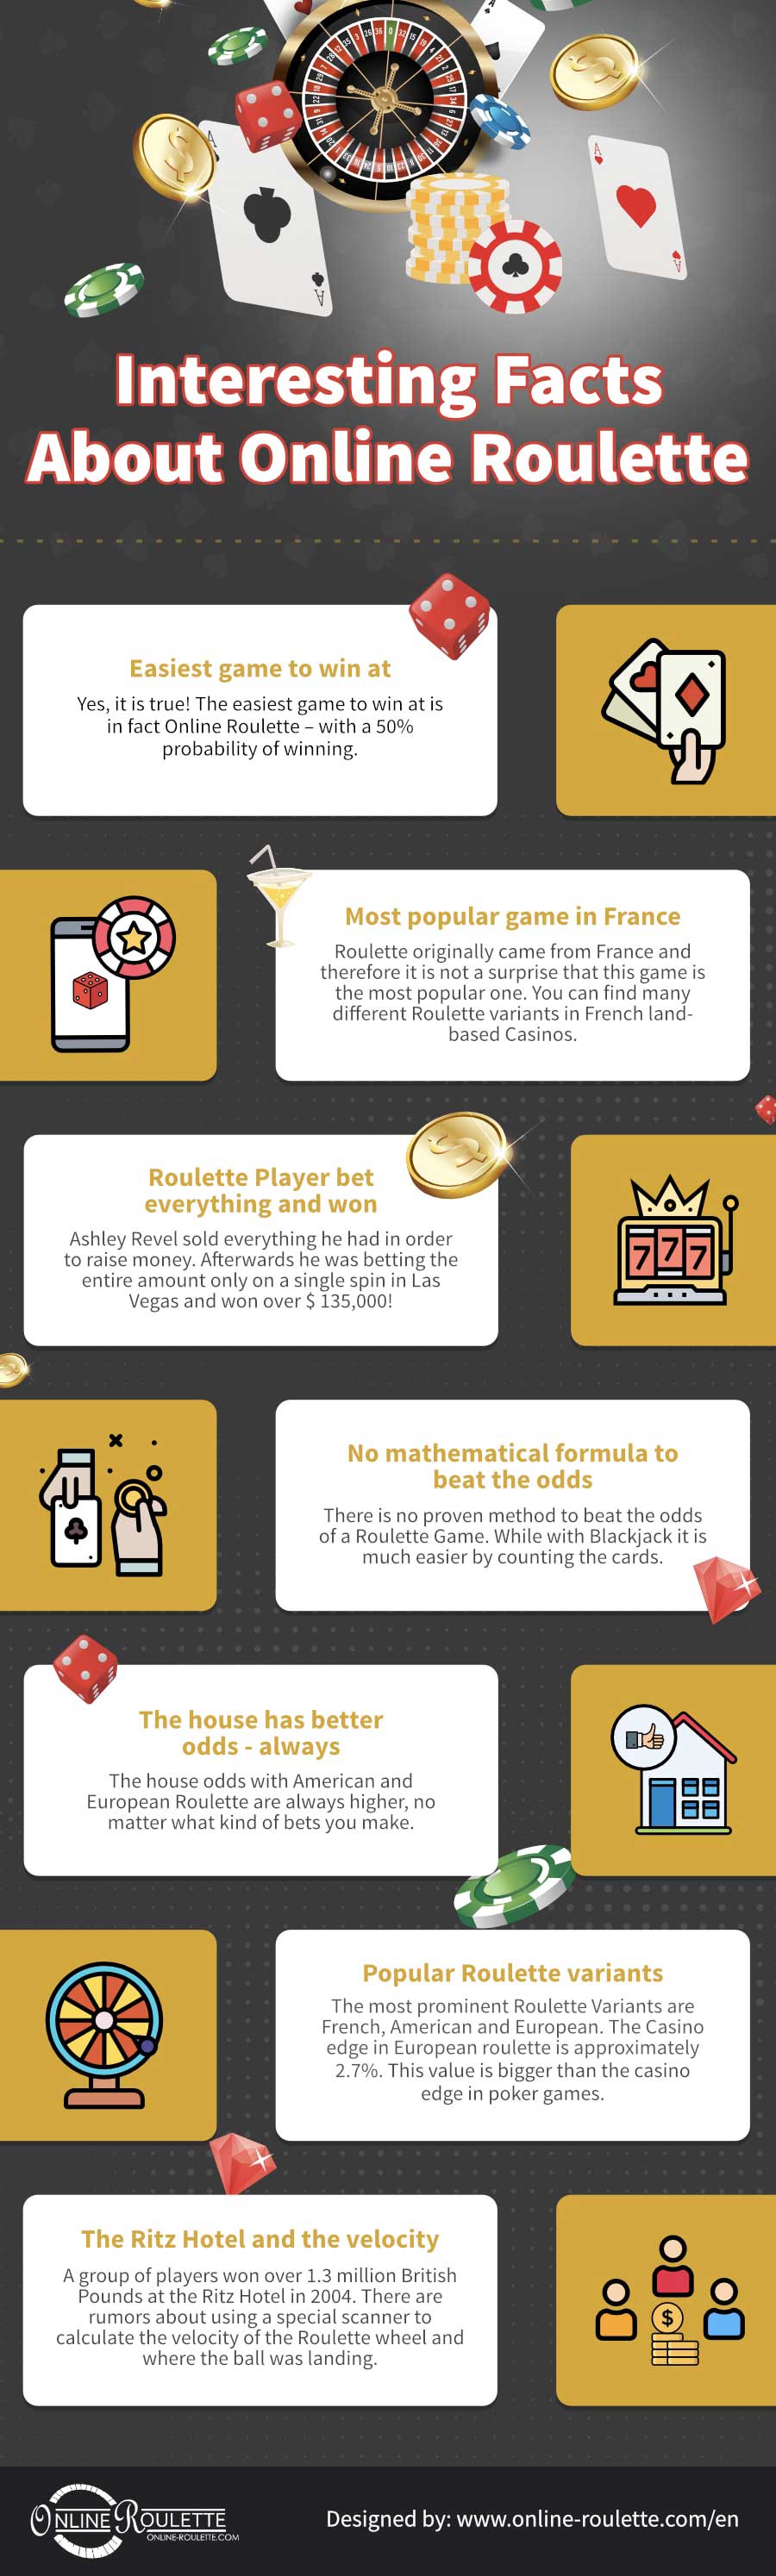 Interesting facts about online roulette